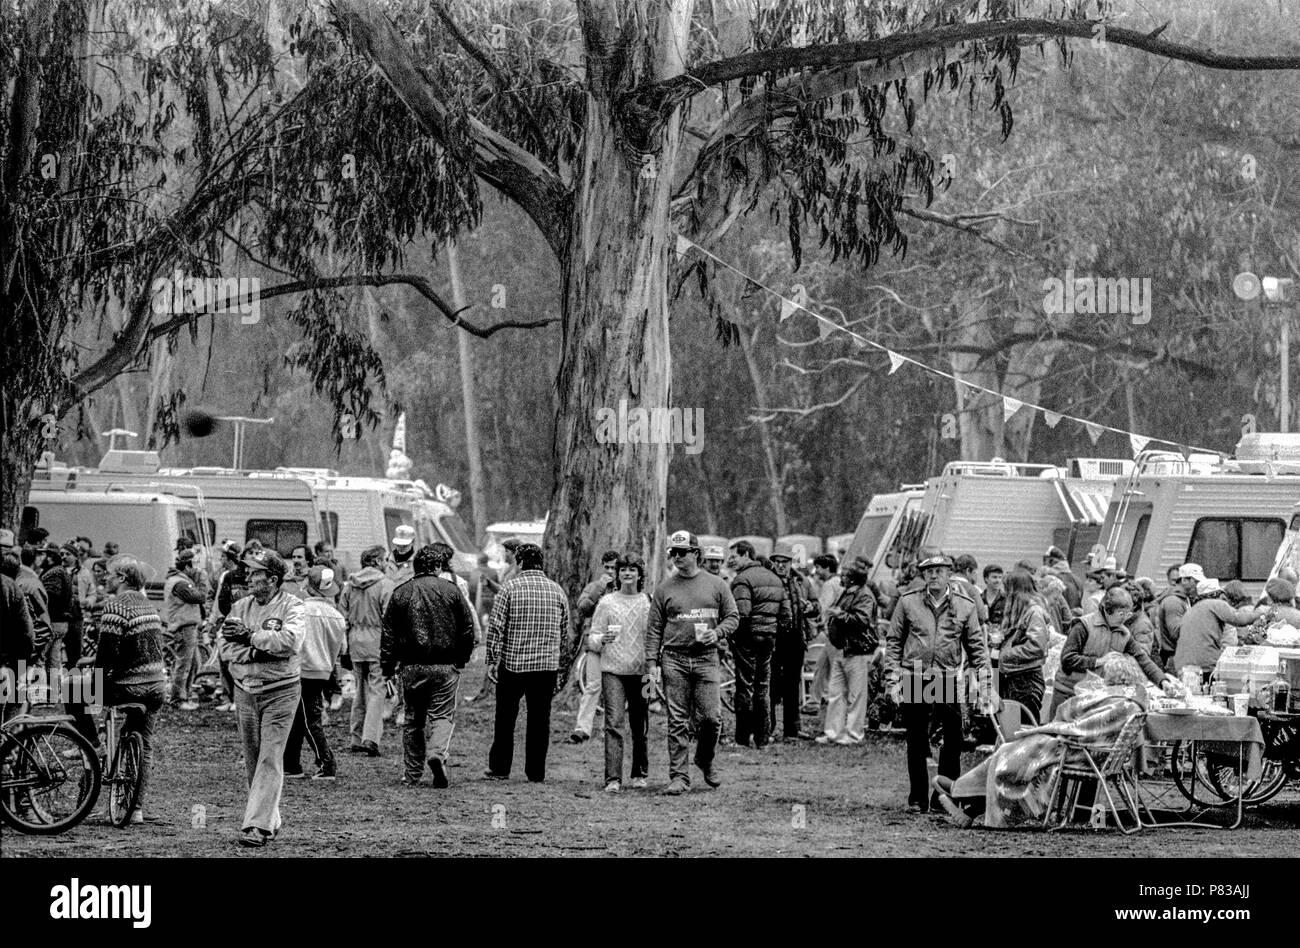 Stanford, California, USA. 20th Jan, 1985. Fans enjoy walking in the cool, foggy morning at the Super Bowl XIX tailgate on the Stanford University campus. The San Francisco 49ers defeated the Miami Dolphins 38-16 on Sunday, January 20, 1985. Credit: Al Golub/ZUMA Wire/Alamy Live News Stock Photo